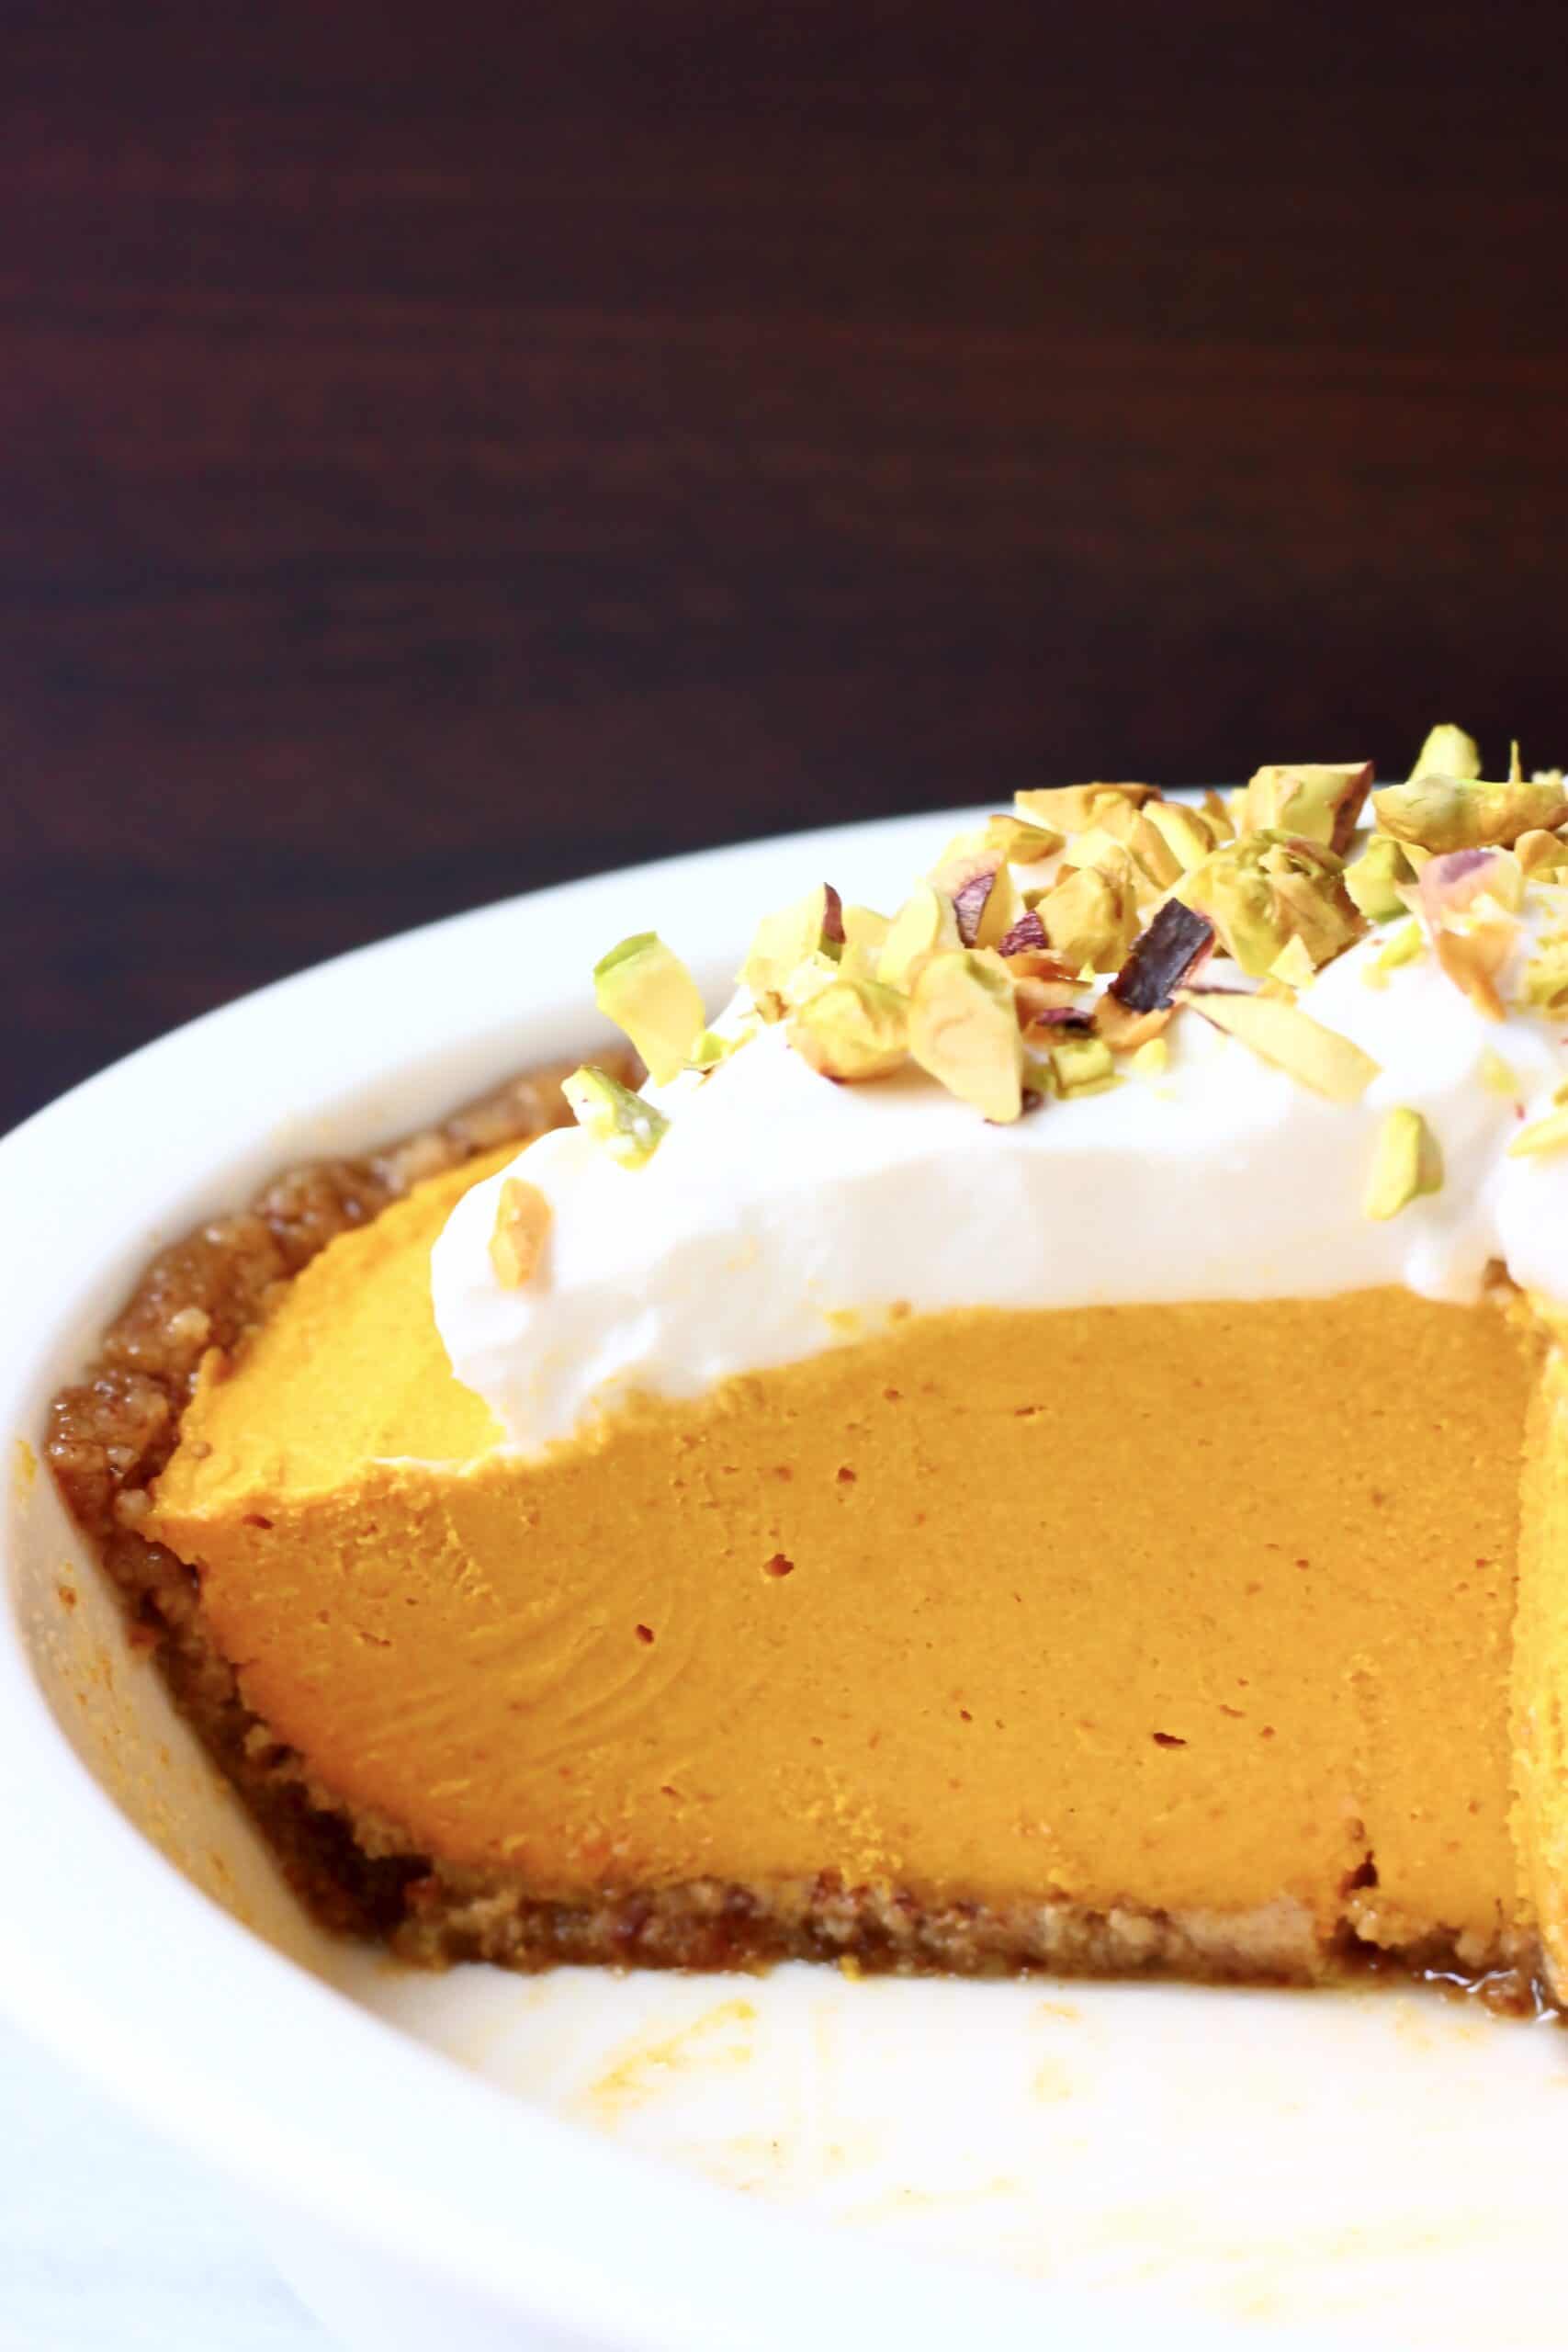 A white pie dish with vegan no-bake pumpkin pie topped with whipped cream and chopped pistachios against a dark brown background